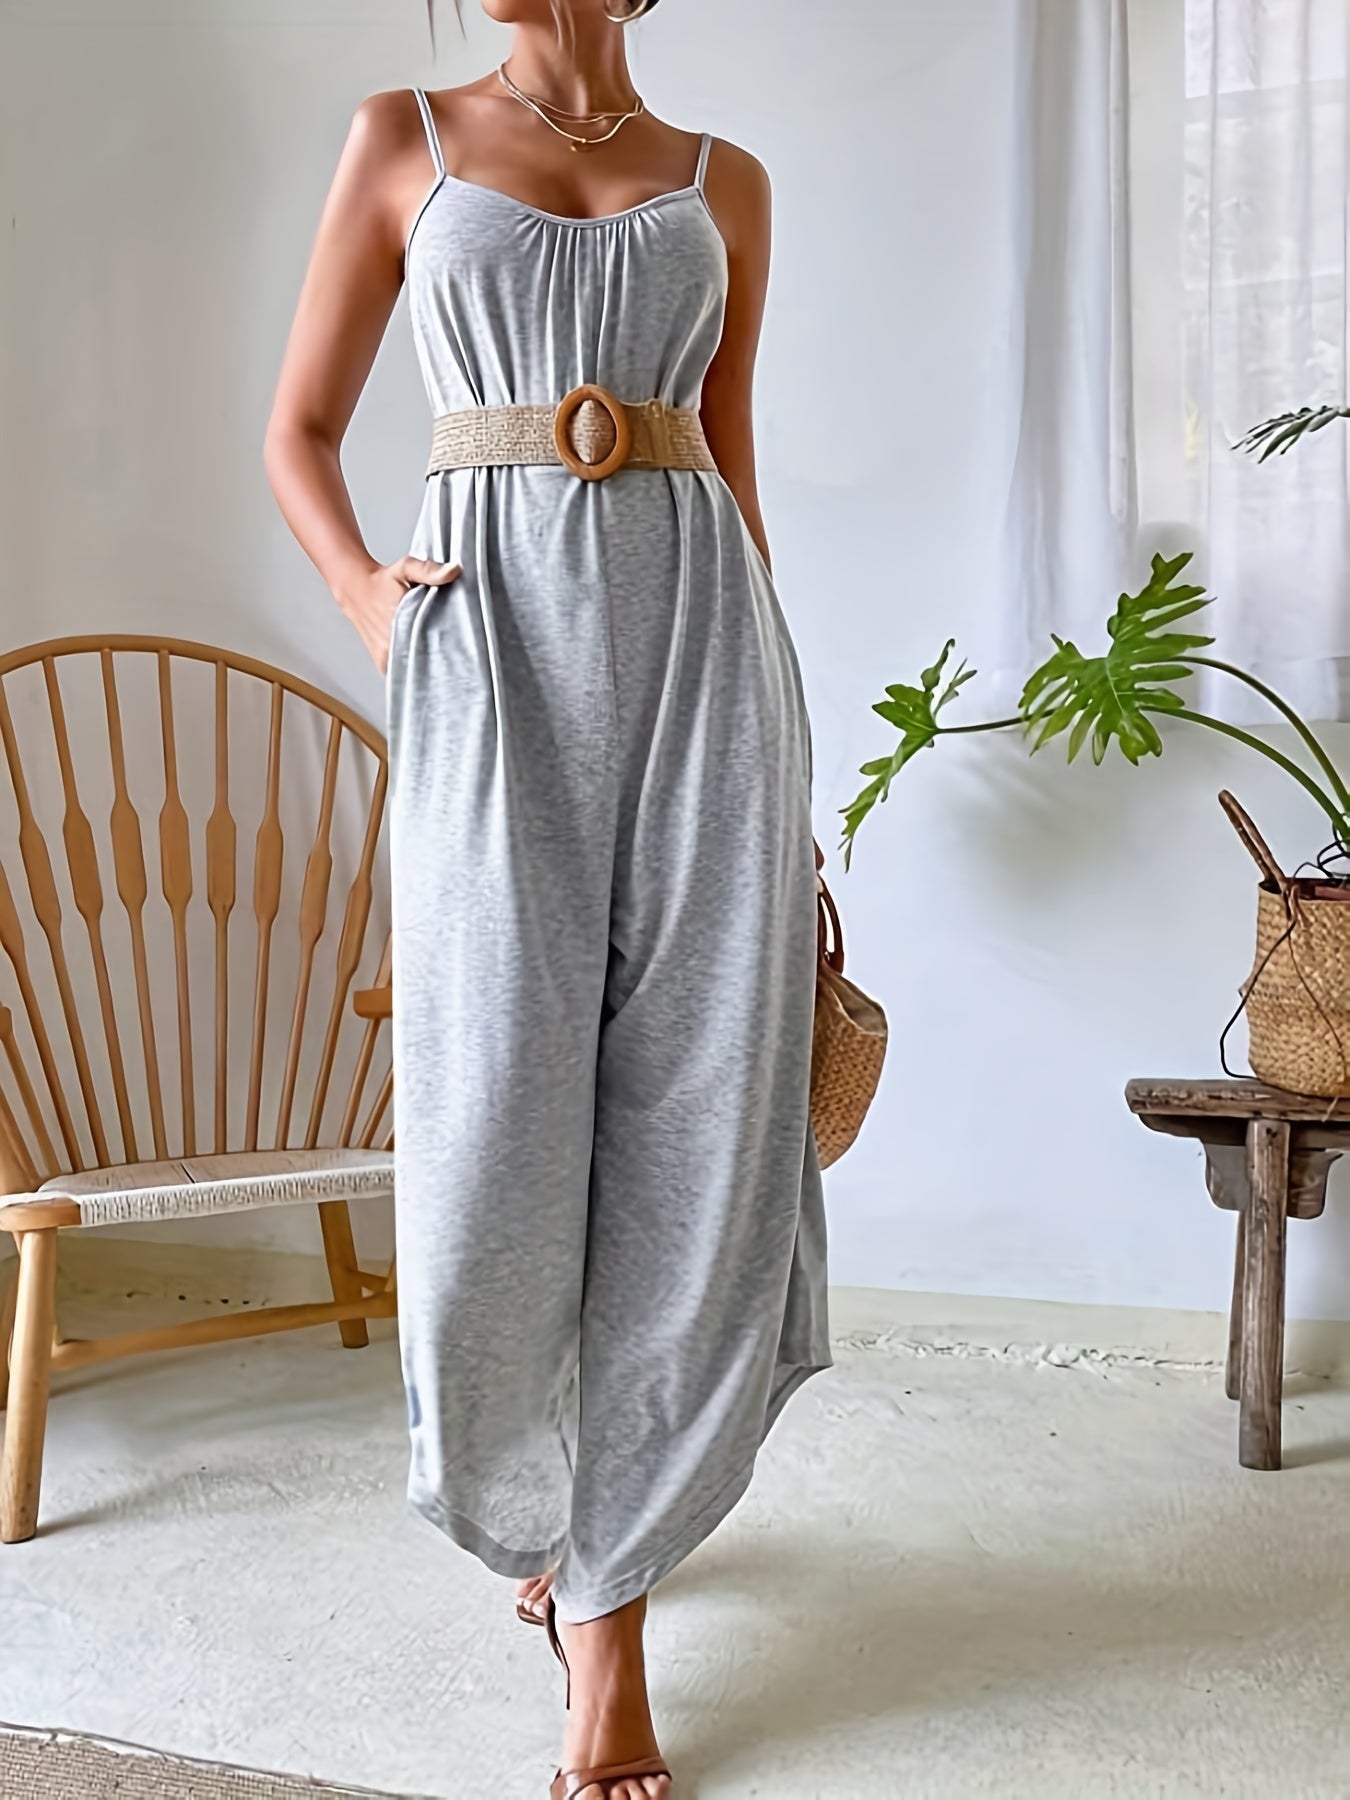 Antmvs Solid Spaghetti Wide Leg Jumpsuit, Casual Backless Sleeveless Jumpsuit For Summer, Women's Clothing